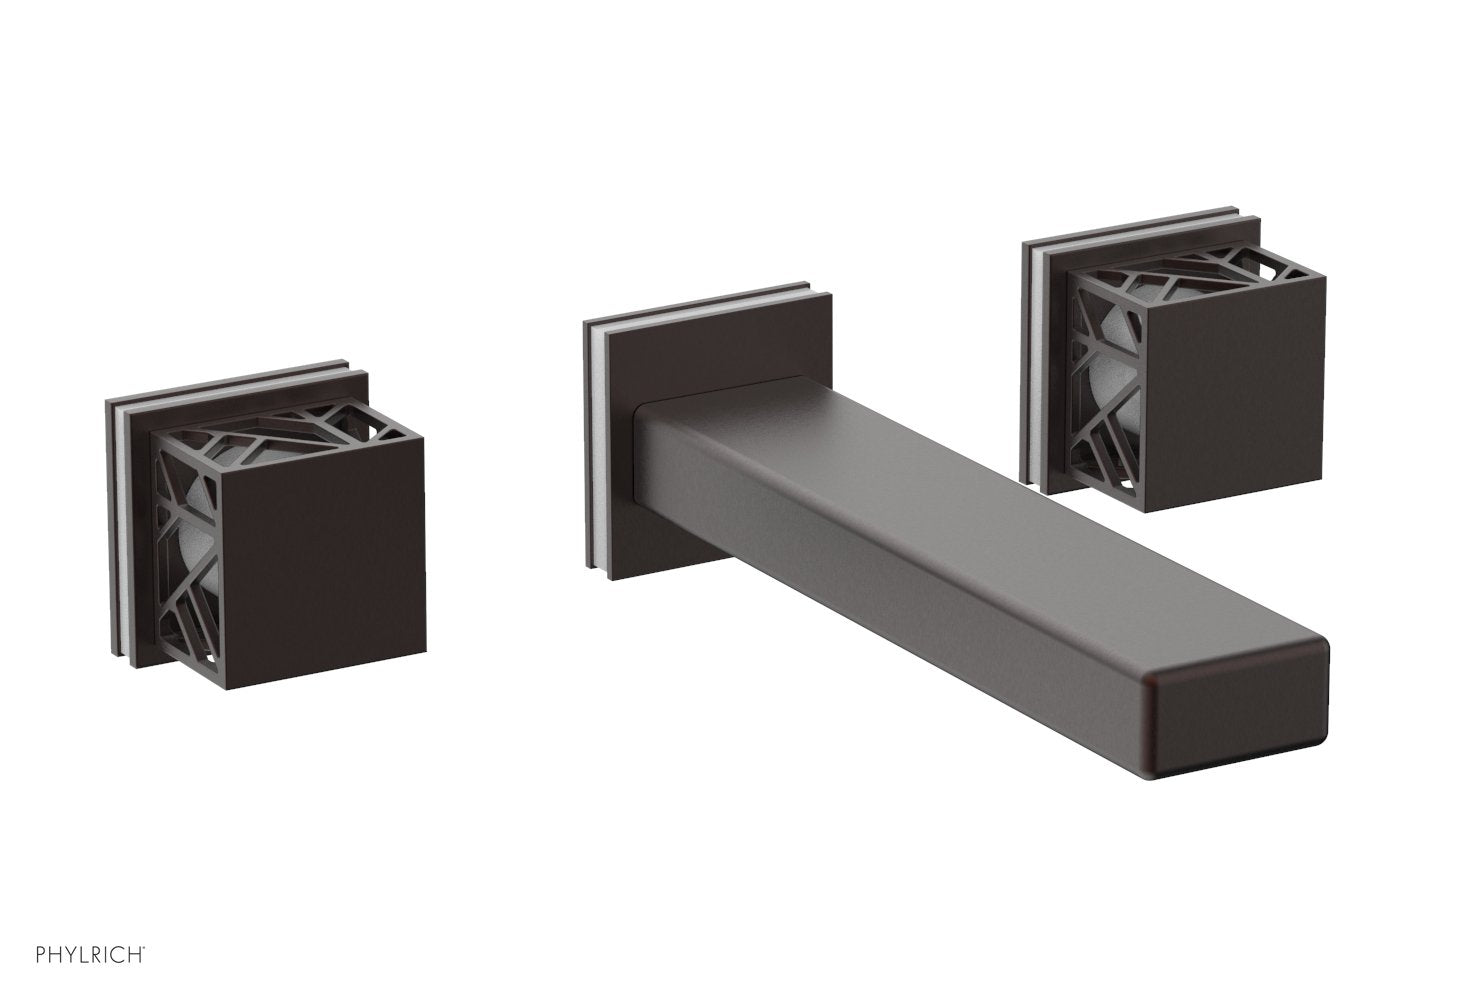 Phylrich JOLIE Wall Tub Set - Square Handles with "White" Accents